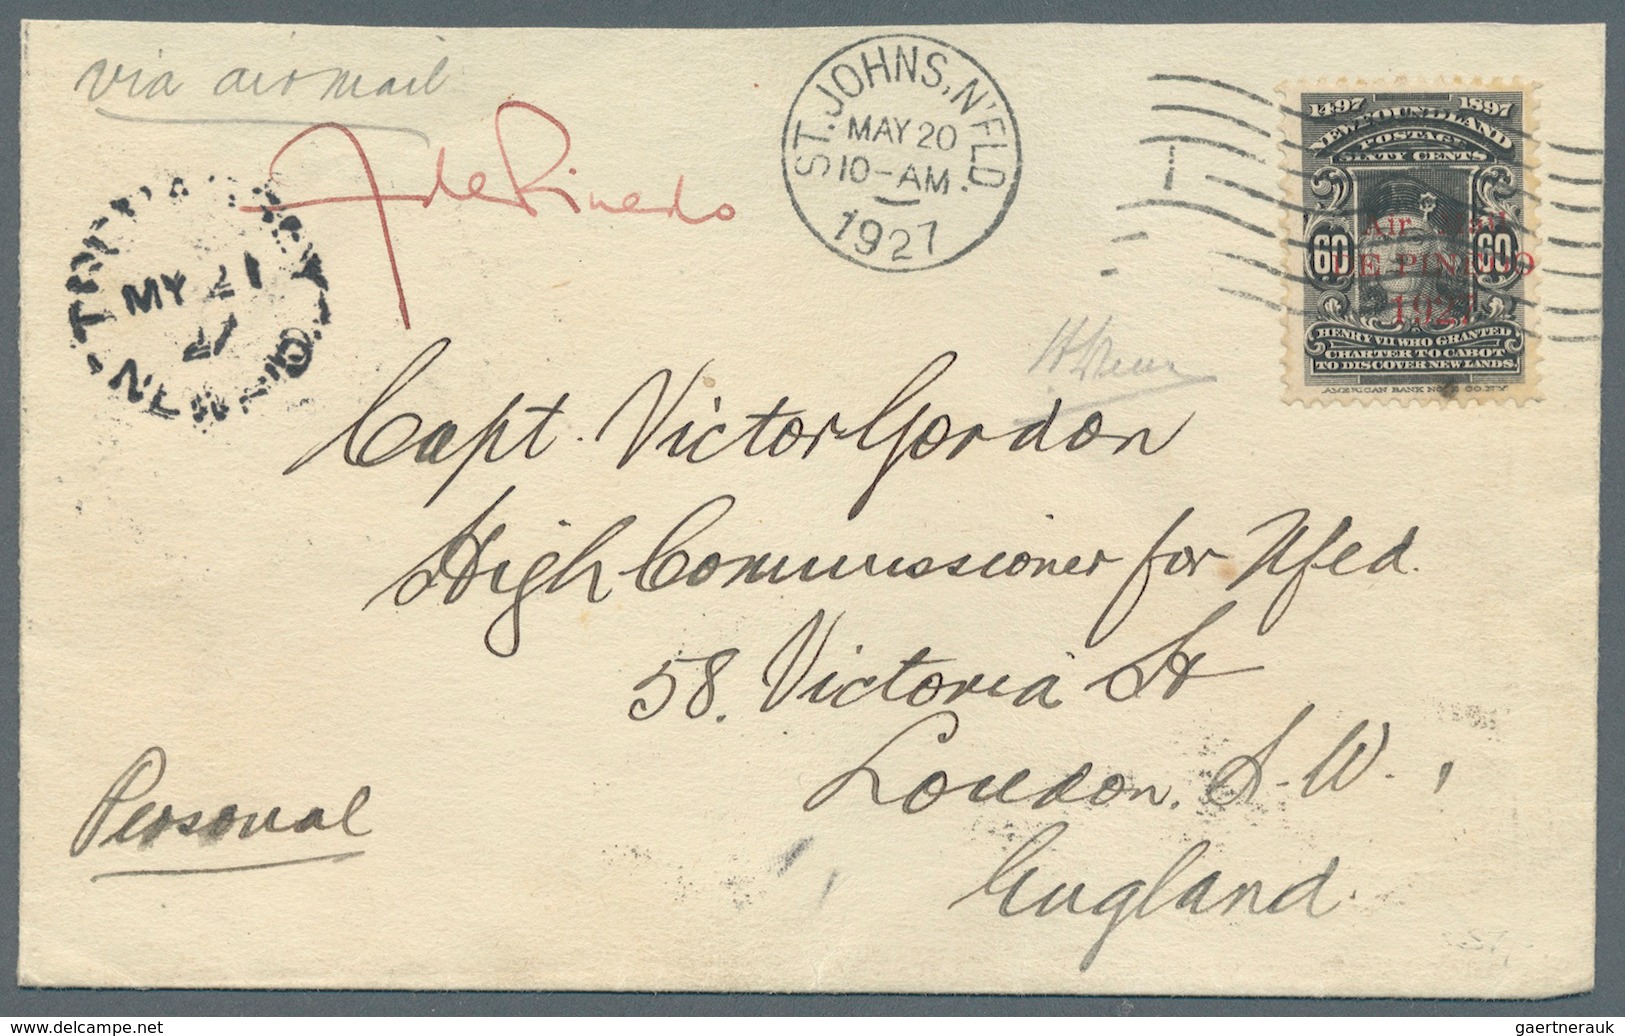 00506 Neufundland - Flugpost: 1927 May 20: THE PINEDO & PRETE FLIGHT - Envelope With 1927 60c Black Tied B - Einde V/d Catalogus (Back Of Book)